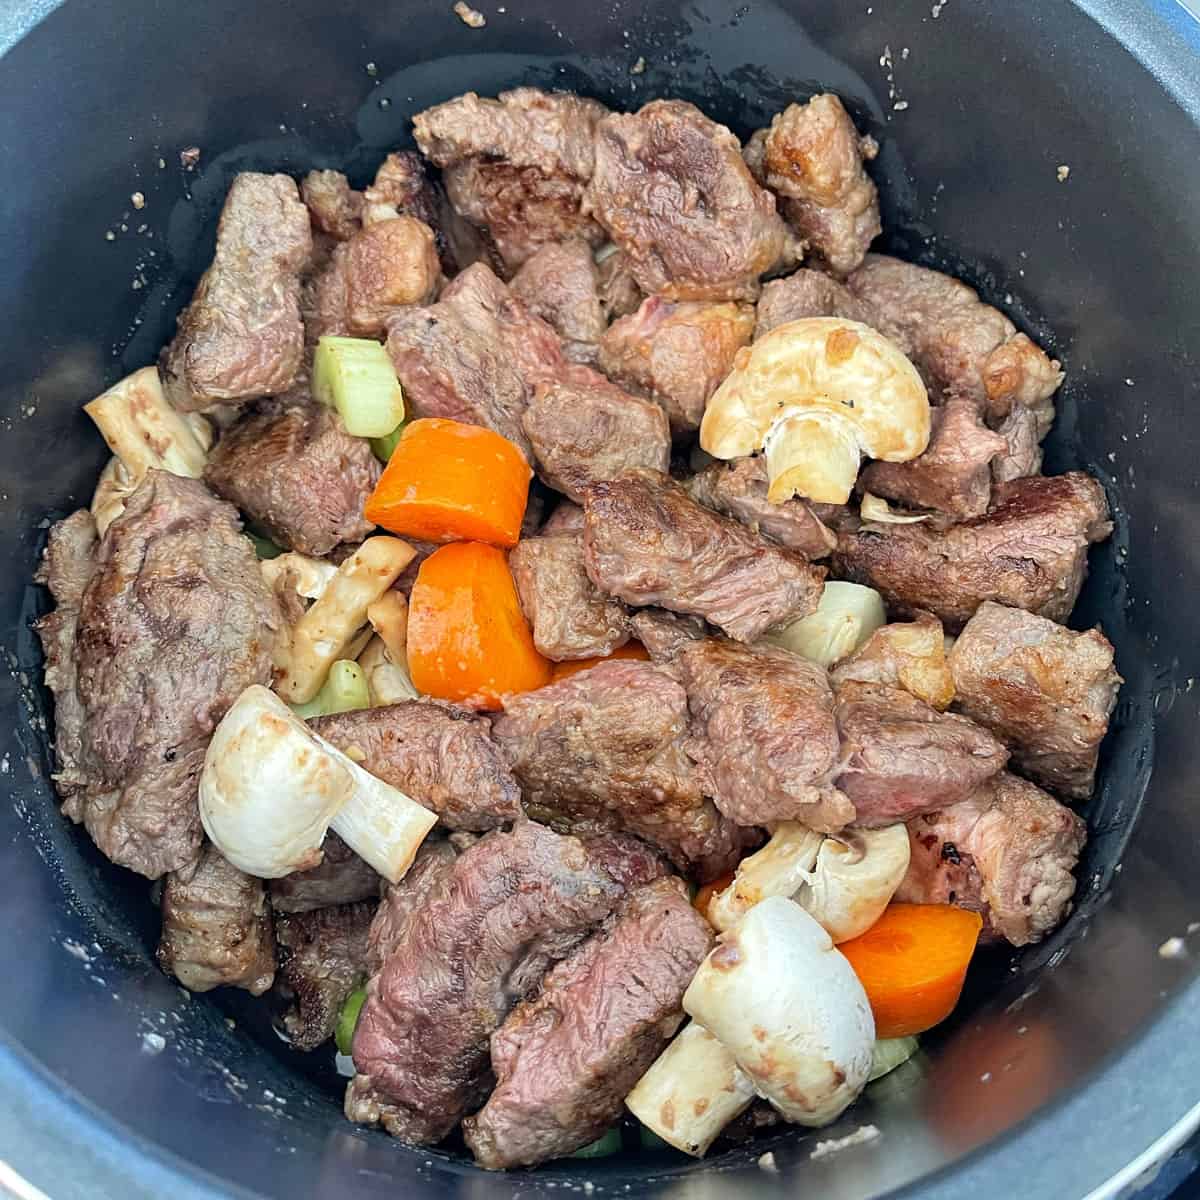 Beef stew ingredients in the slow cooker.